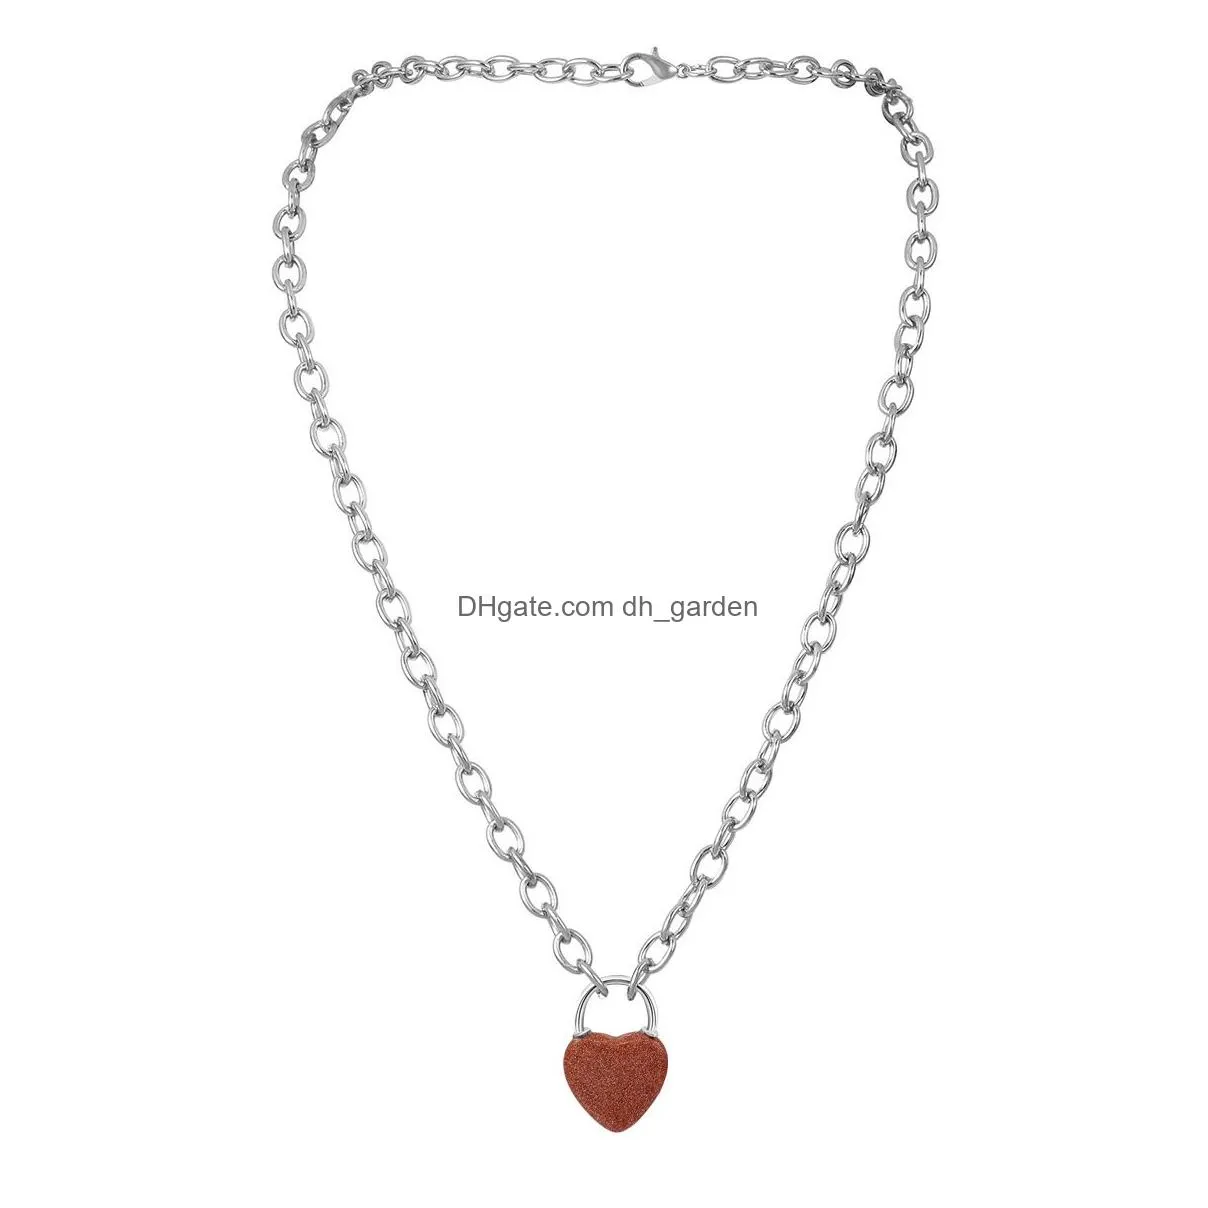 good quality natural crystal gemstone love heart lock charm pendant necklace with alloy chain for men and women